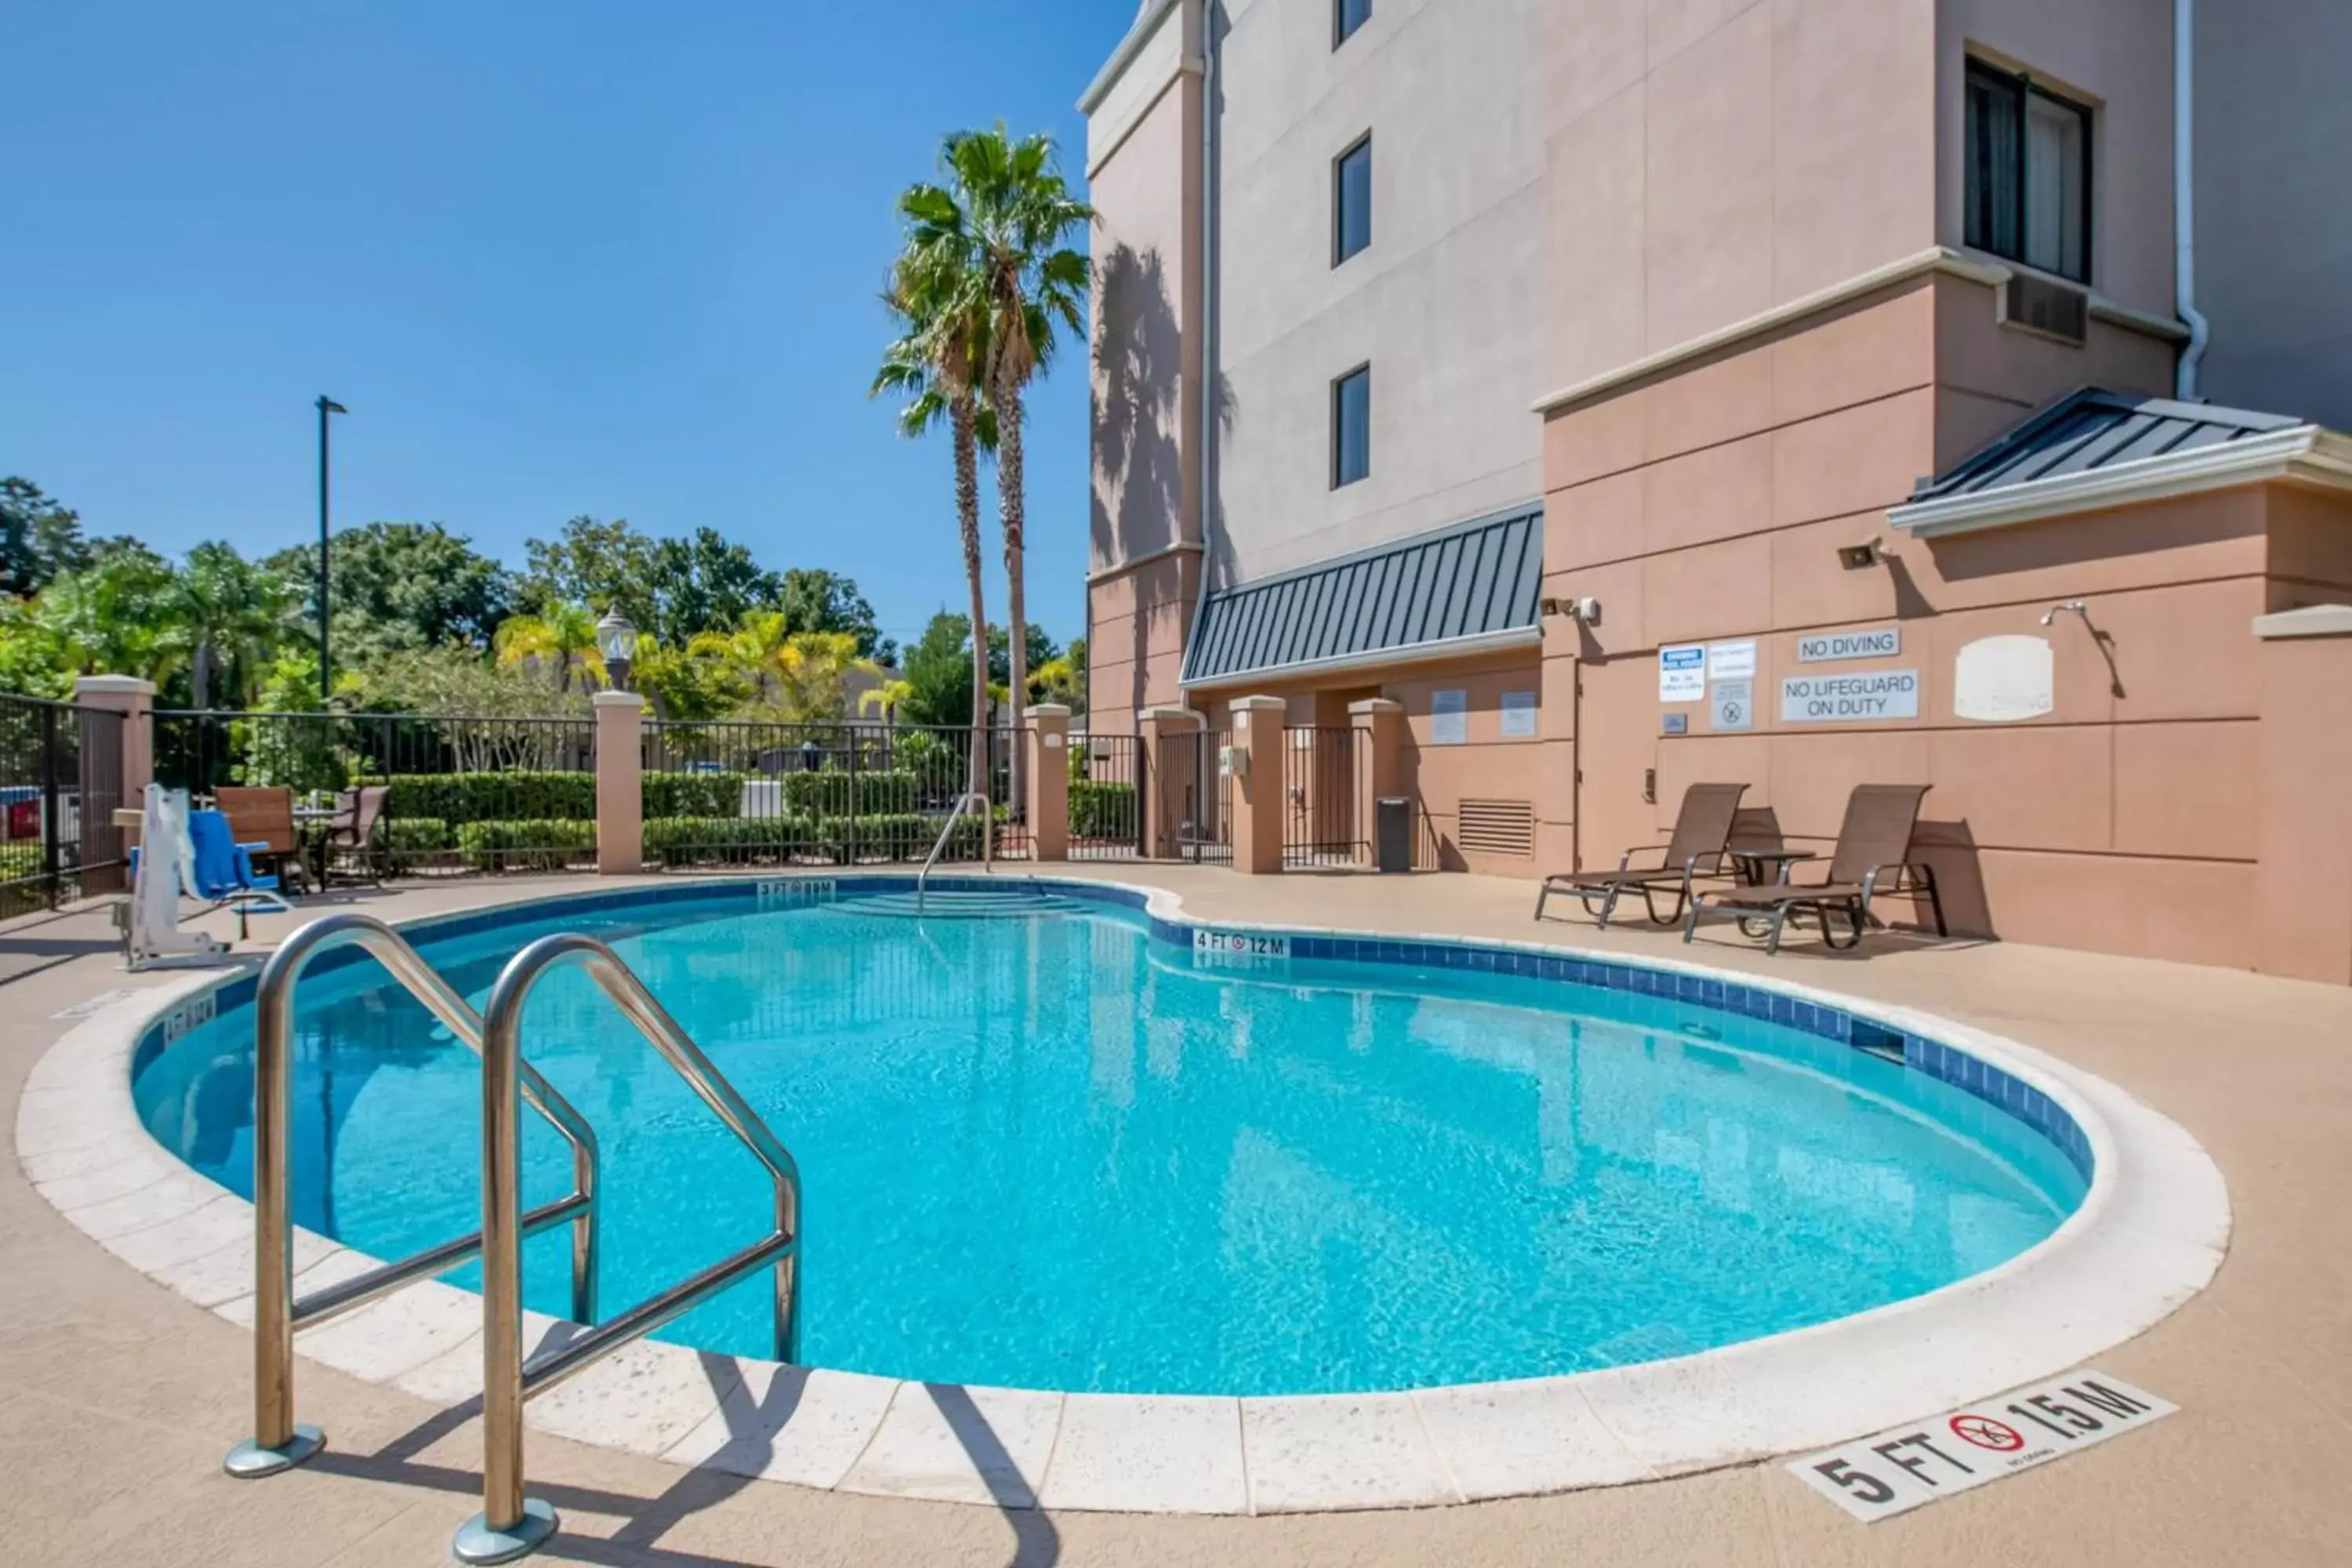 Swimming Pool in Fairfield Inn and Suites Holiday Tarpon Springs